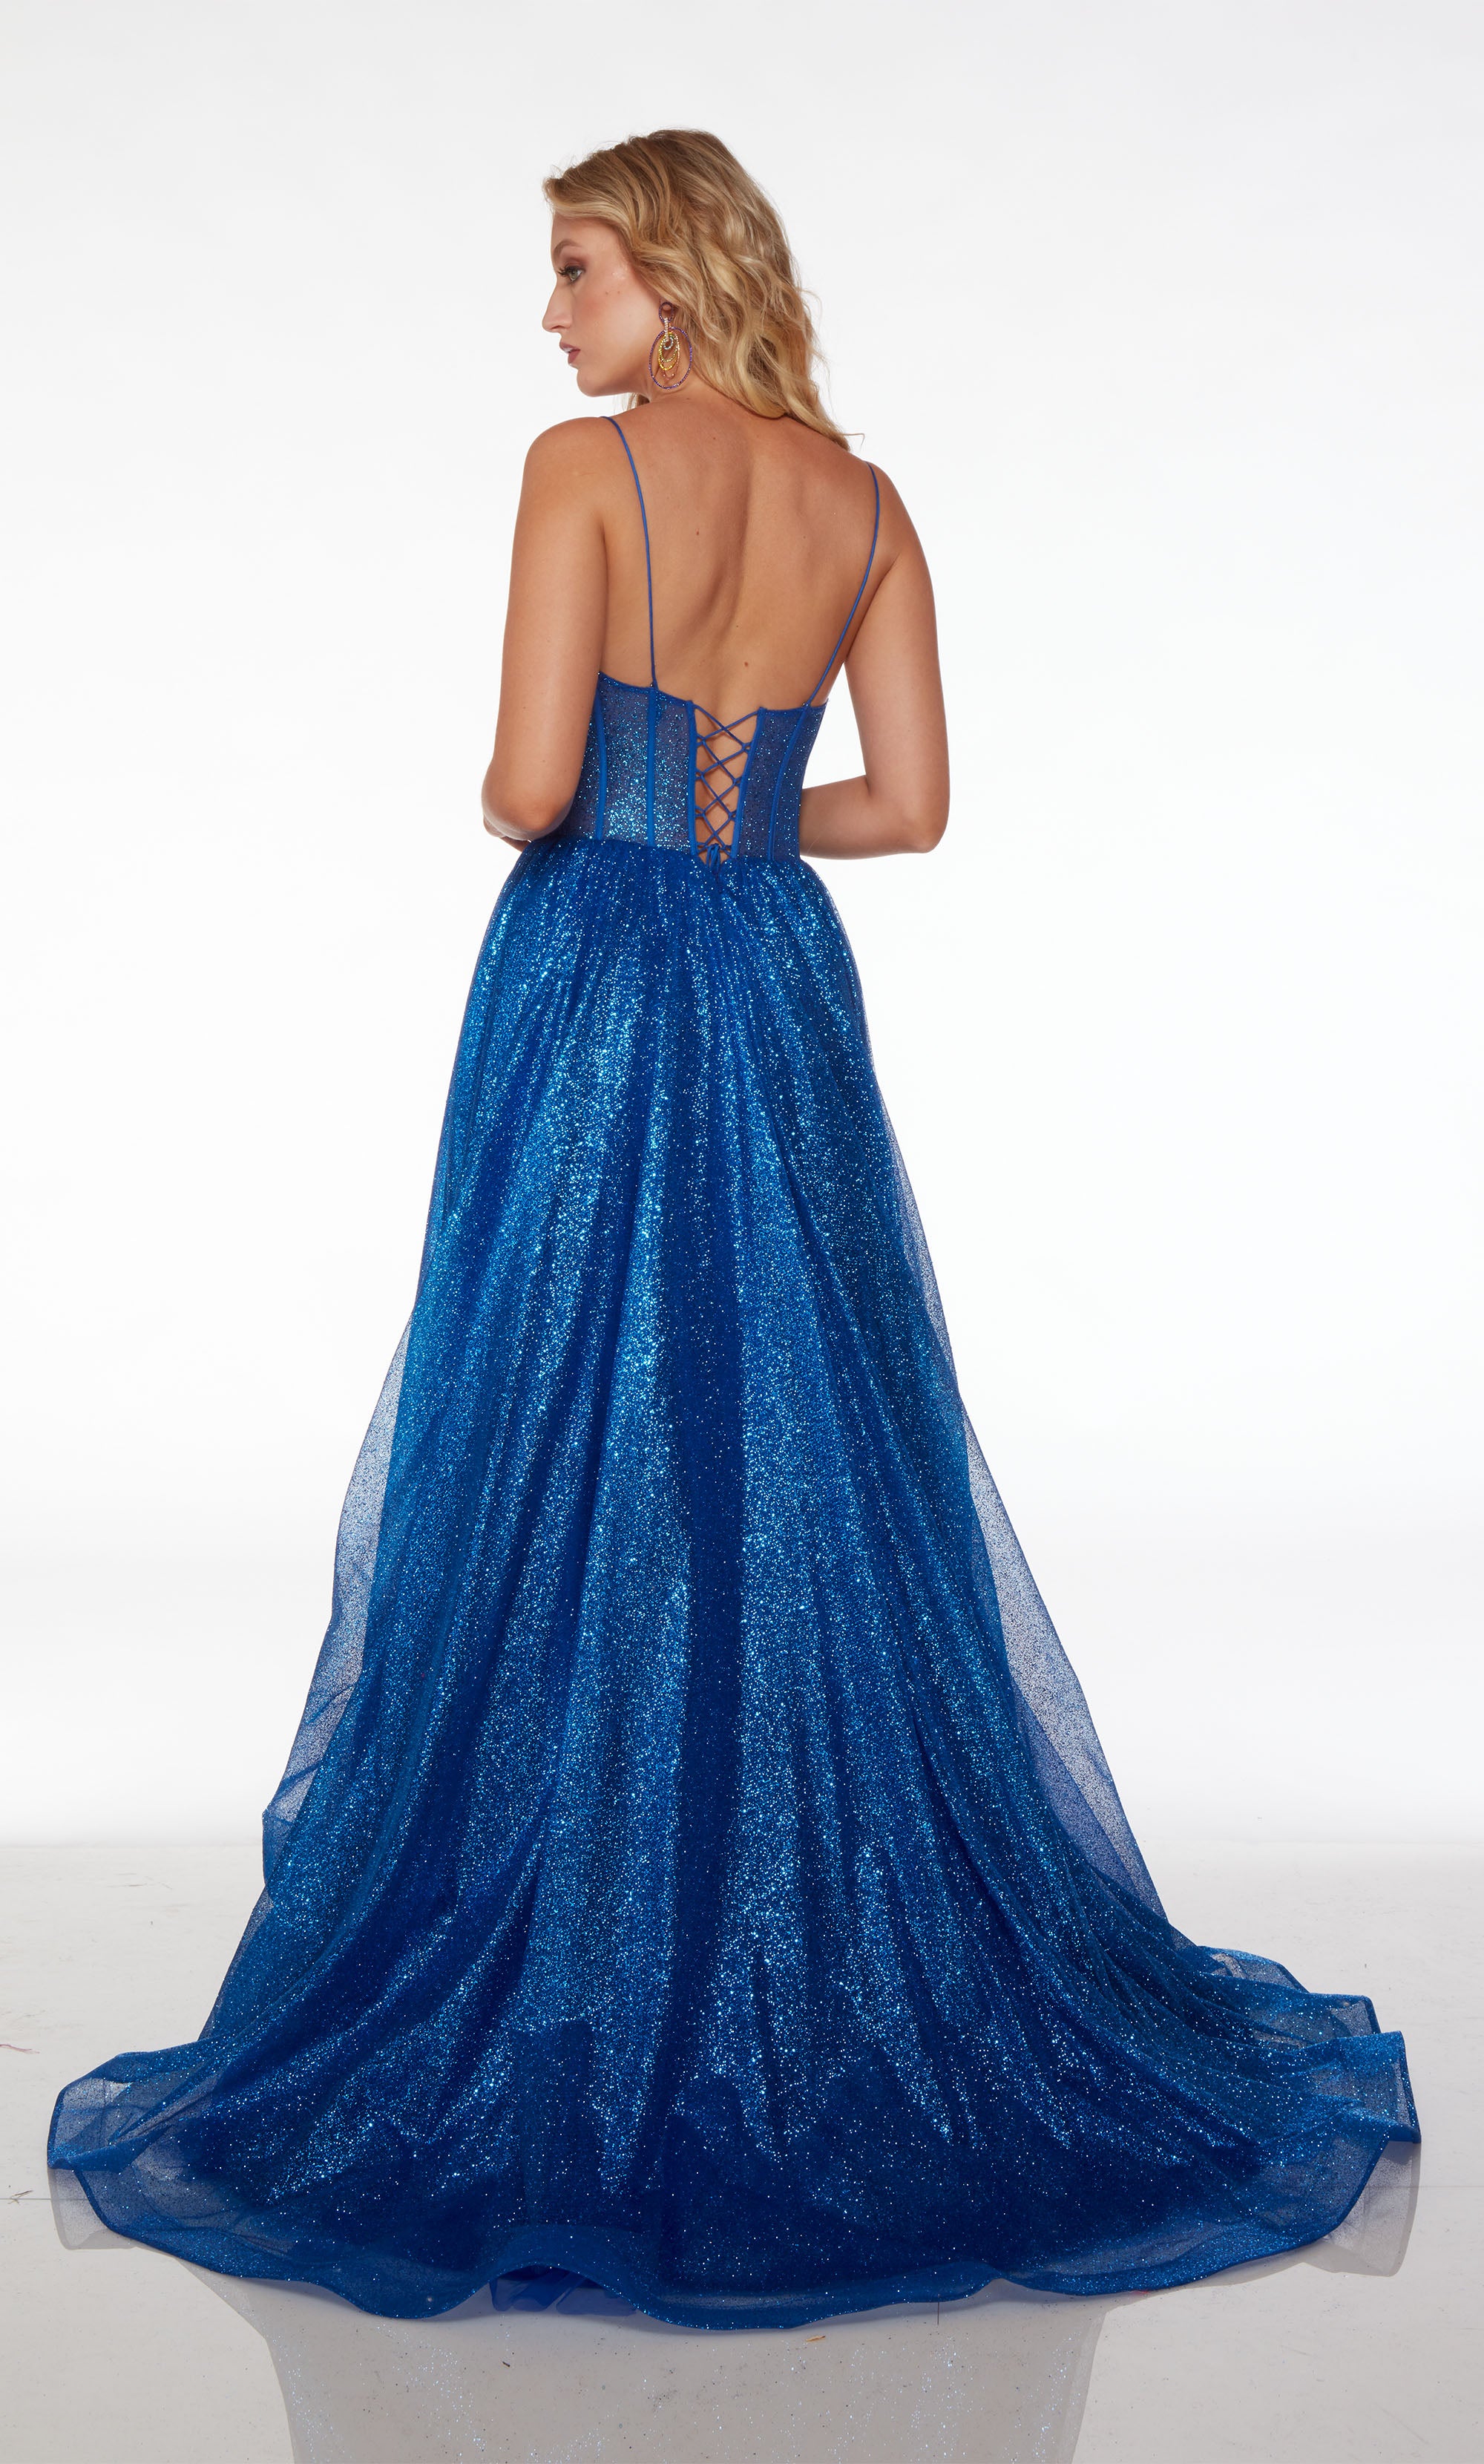 Vibrant electric blue corset dress in glitter tulle fabric, featuring an plunging neckline, high slit, lace-up back, and an long train for an stunning and stylish look.